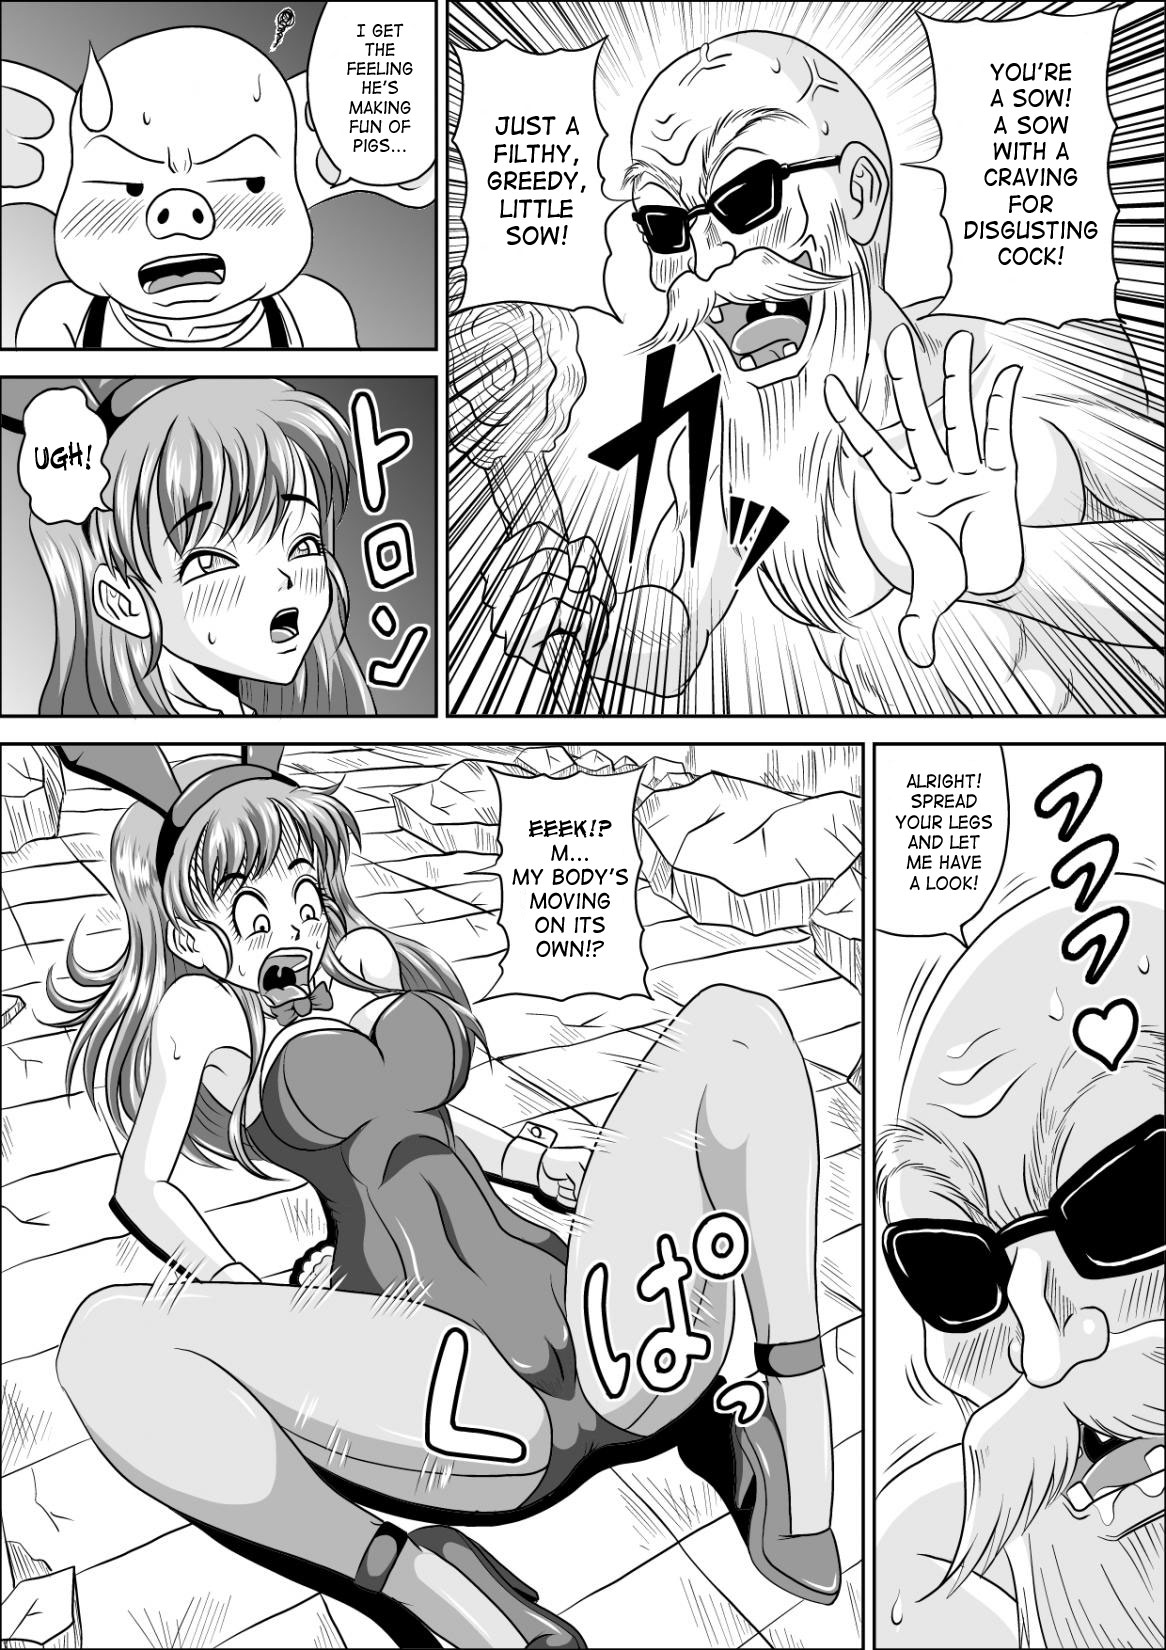 [Pyramid House] Sow in the Bunny (Dragon Ball) [English] {doujin-moe} page 8 full